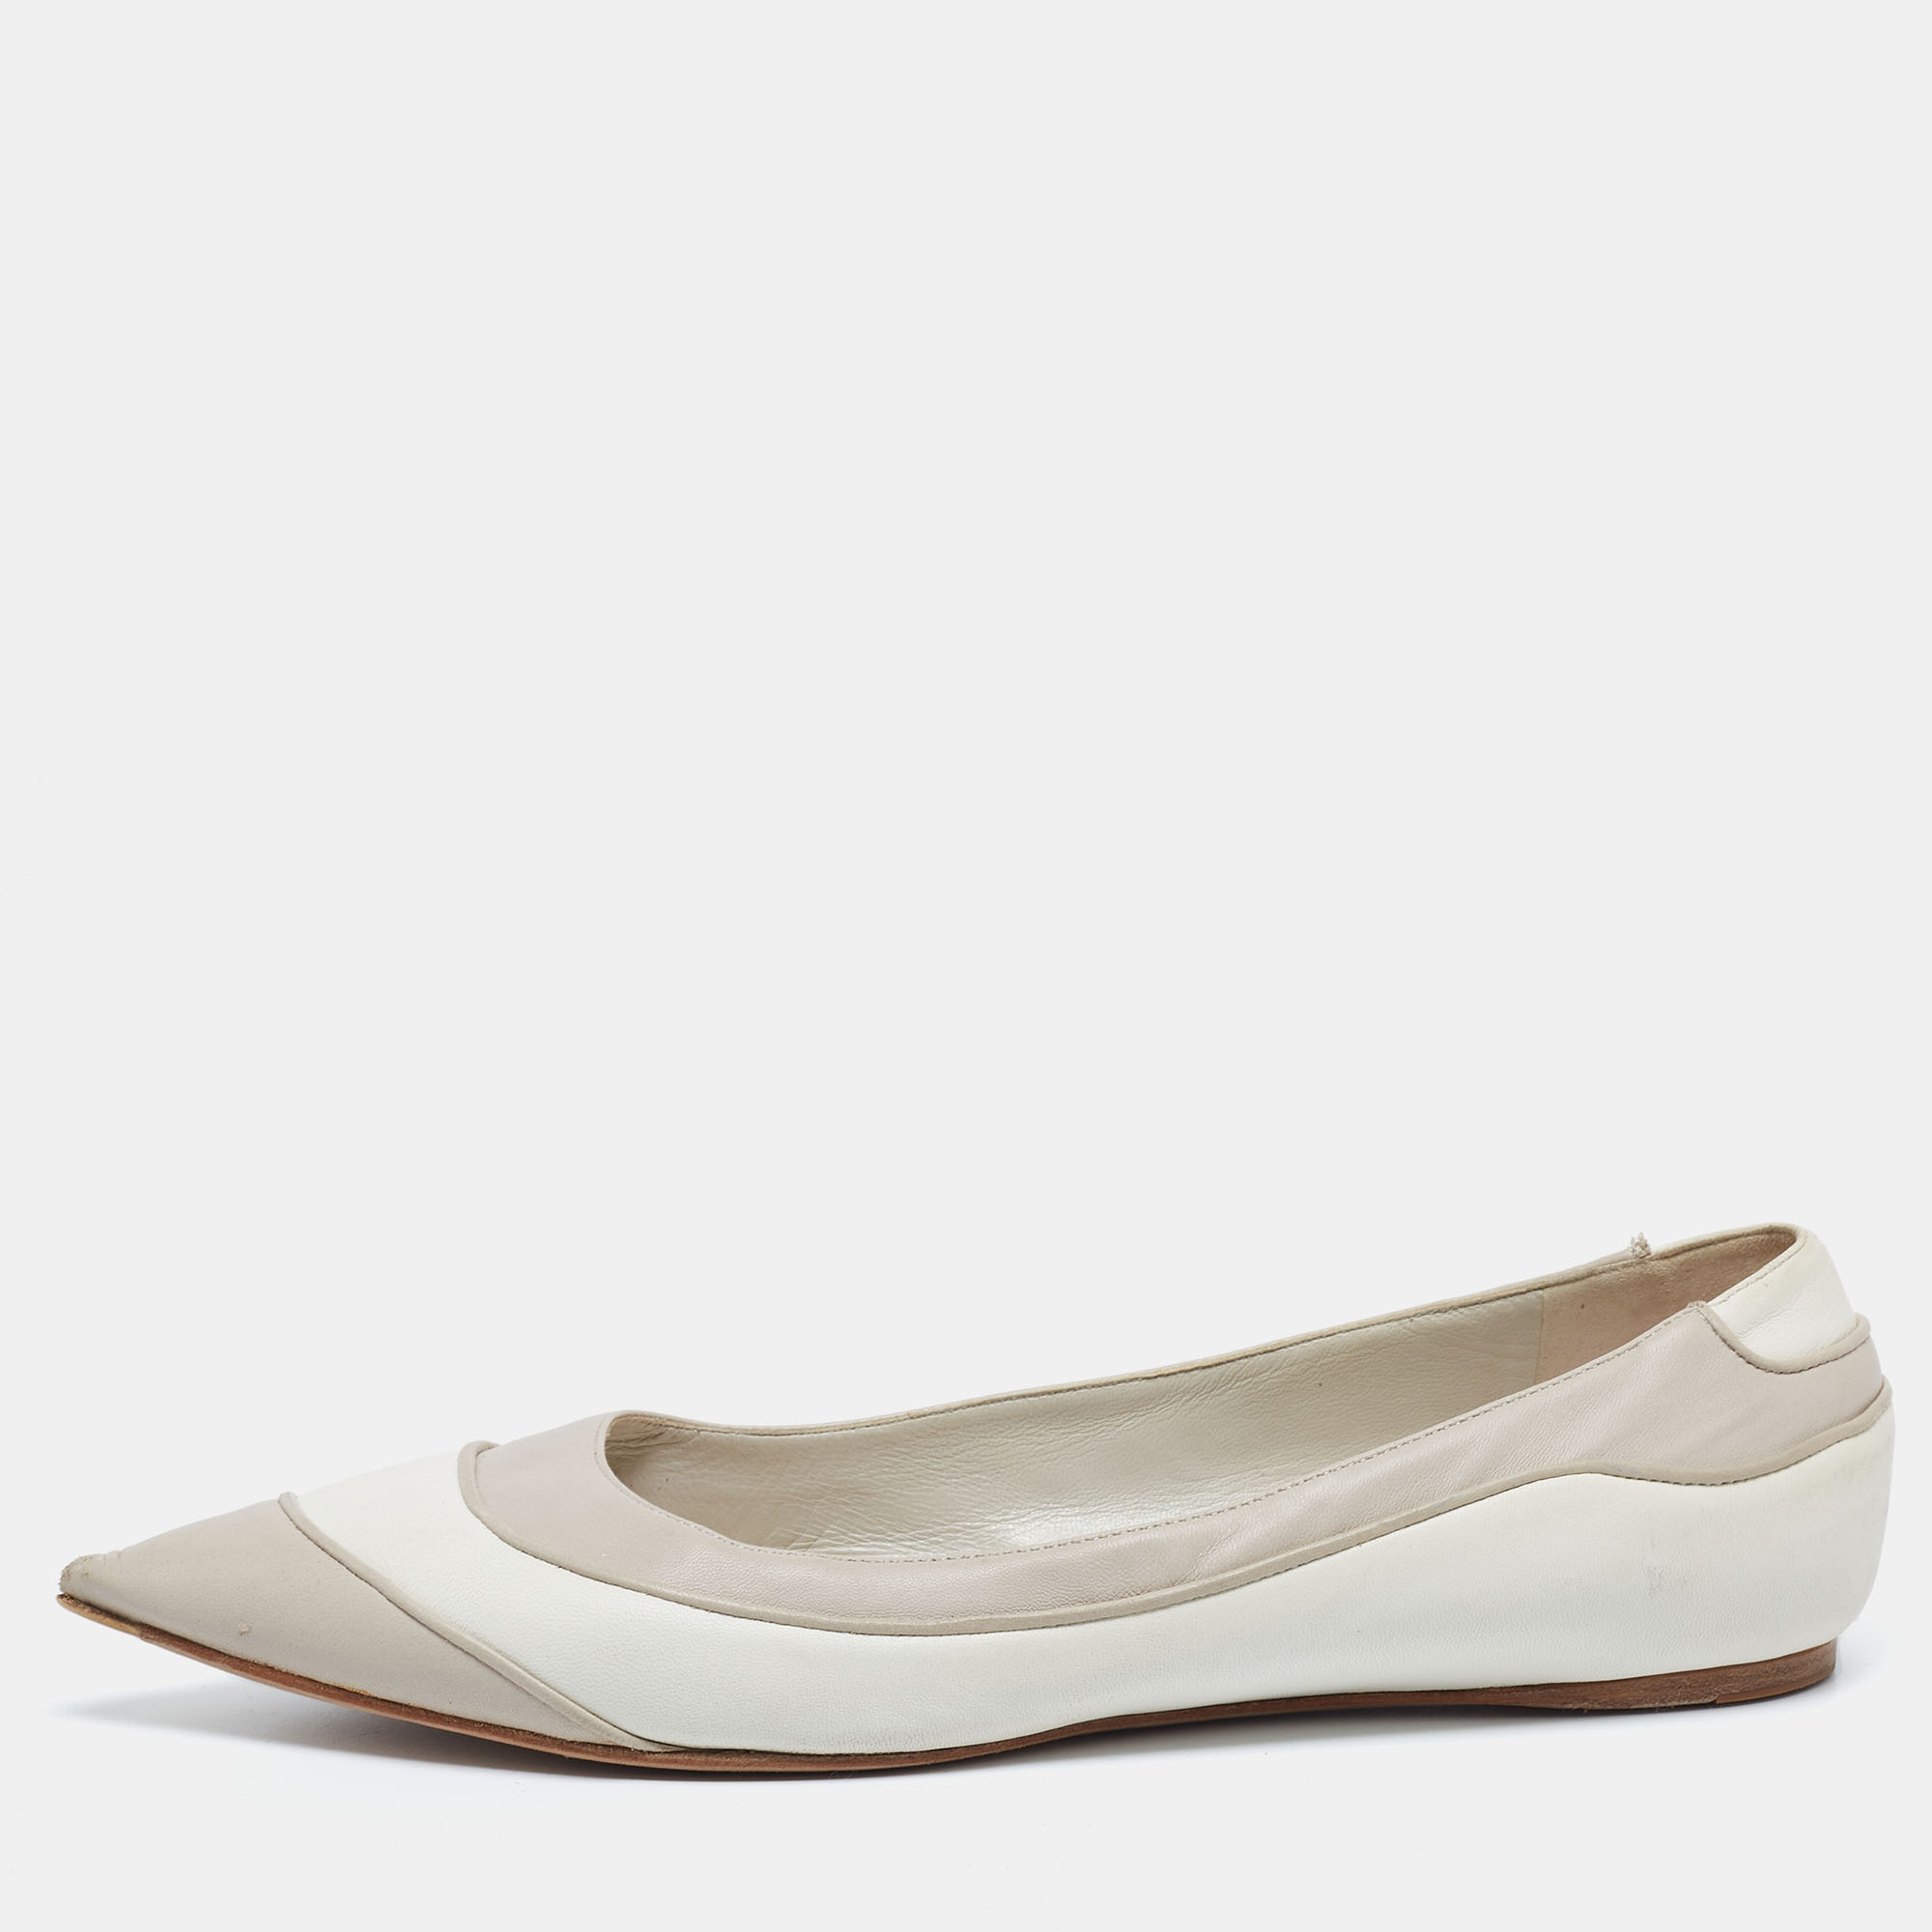 Dior off-white/light grey leather pointed toe ballet flats size 40.5